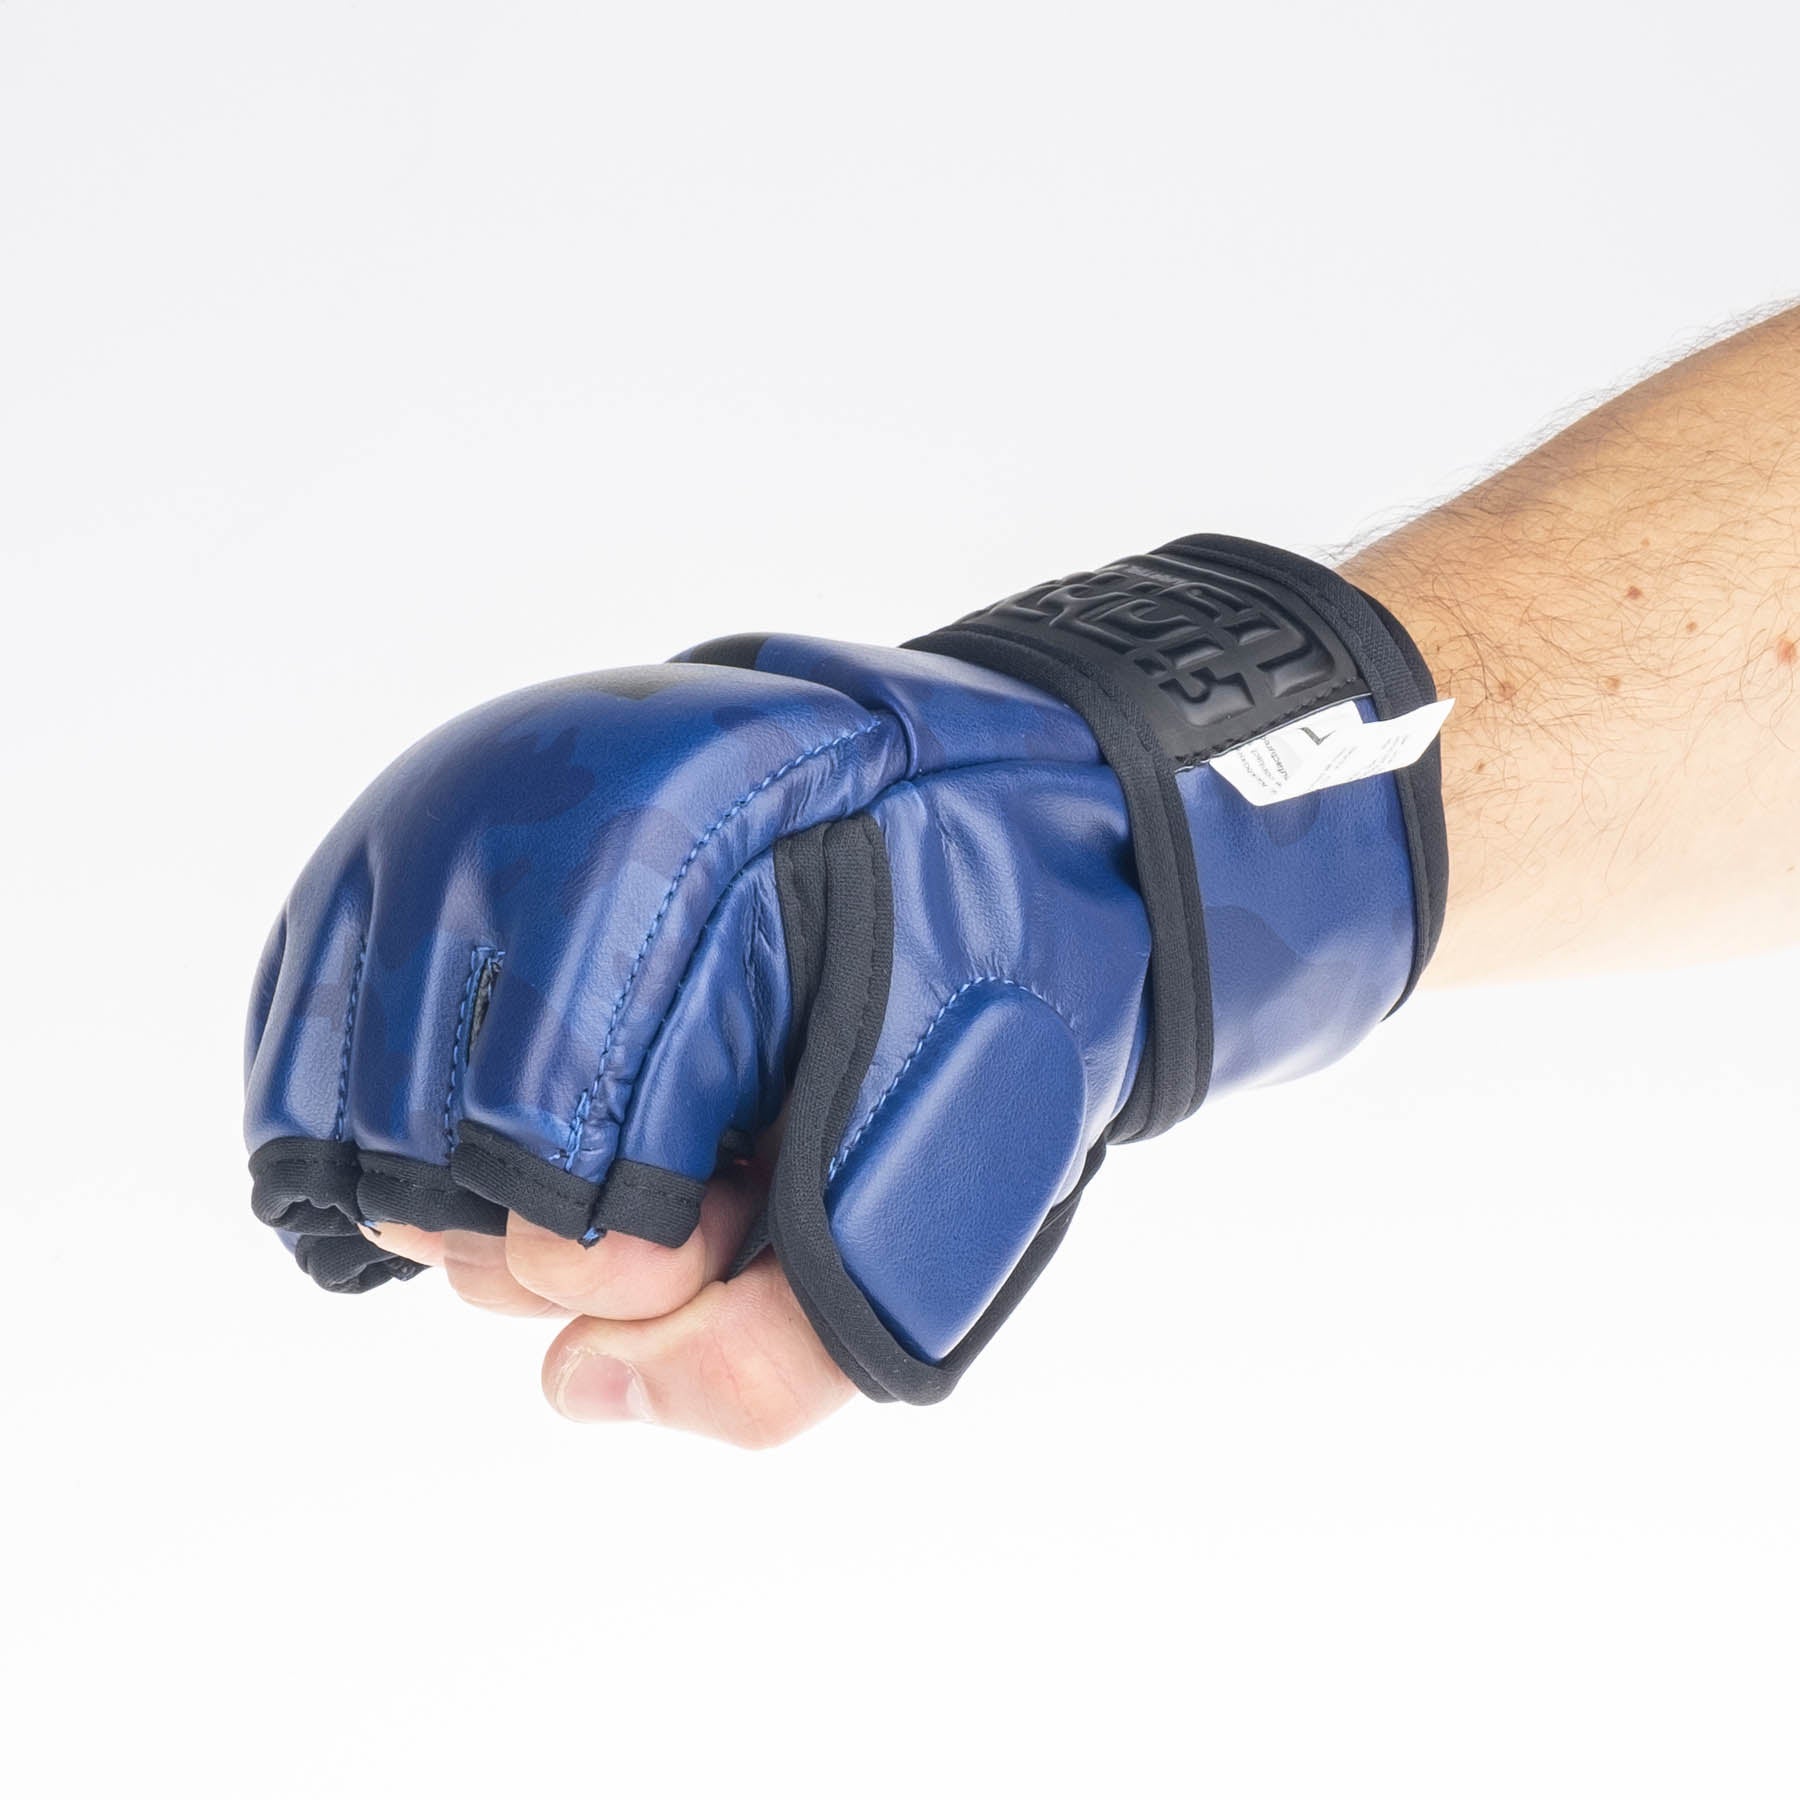 Fighter MMA Gloves Competition - blue camo